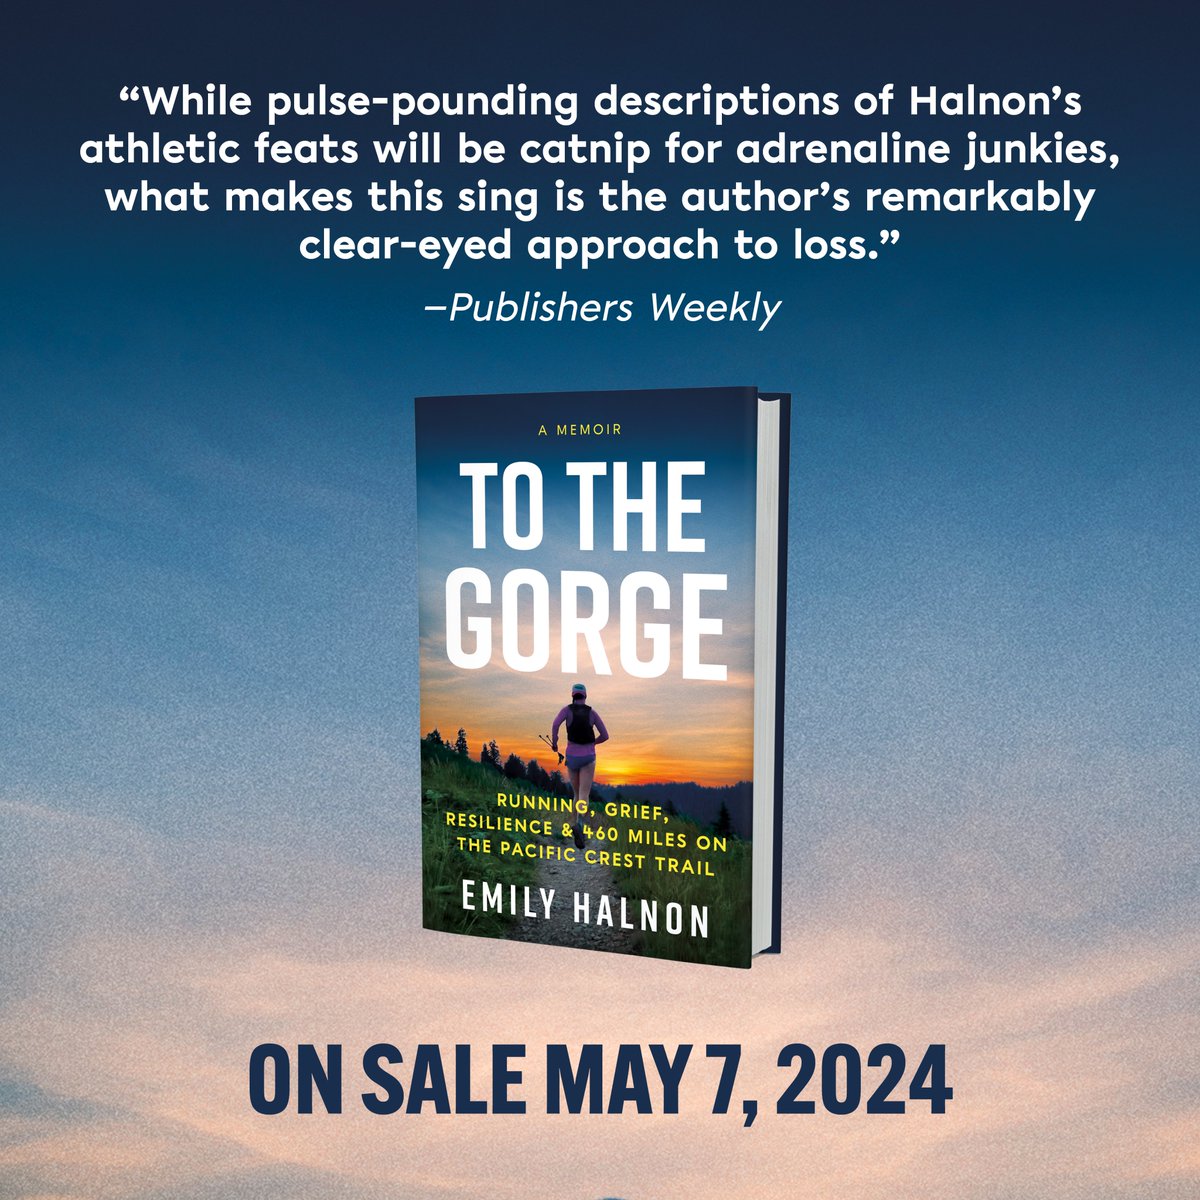 TO THE GORGE is officially out and available everywhere books are sold. To the Gorge is a story about my 460-mile run across the Oregon PCT to celebrate my brave and inspiring mom. It's a story born from loss, but it's a lot about live. tinyurl.com/ycyfh3bt